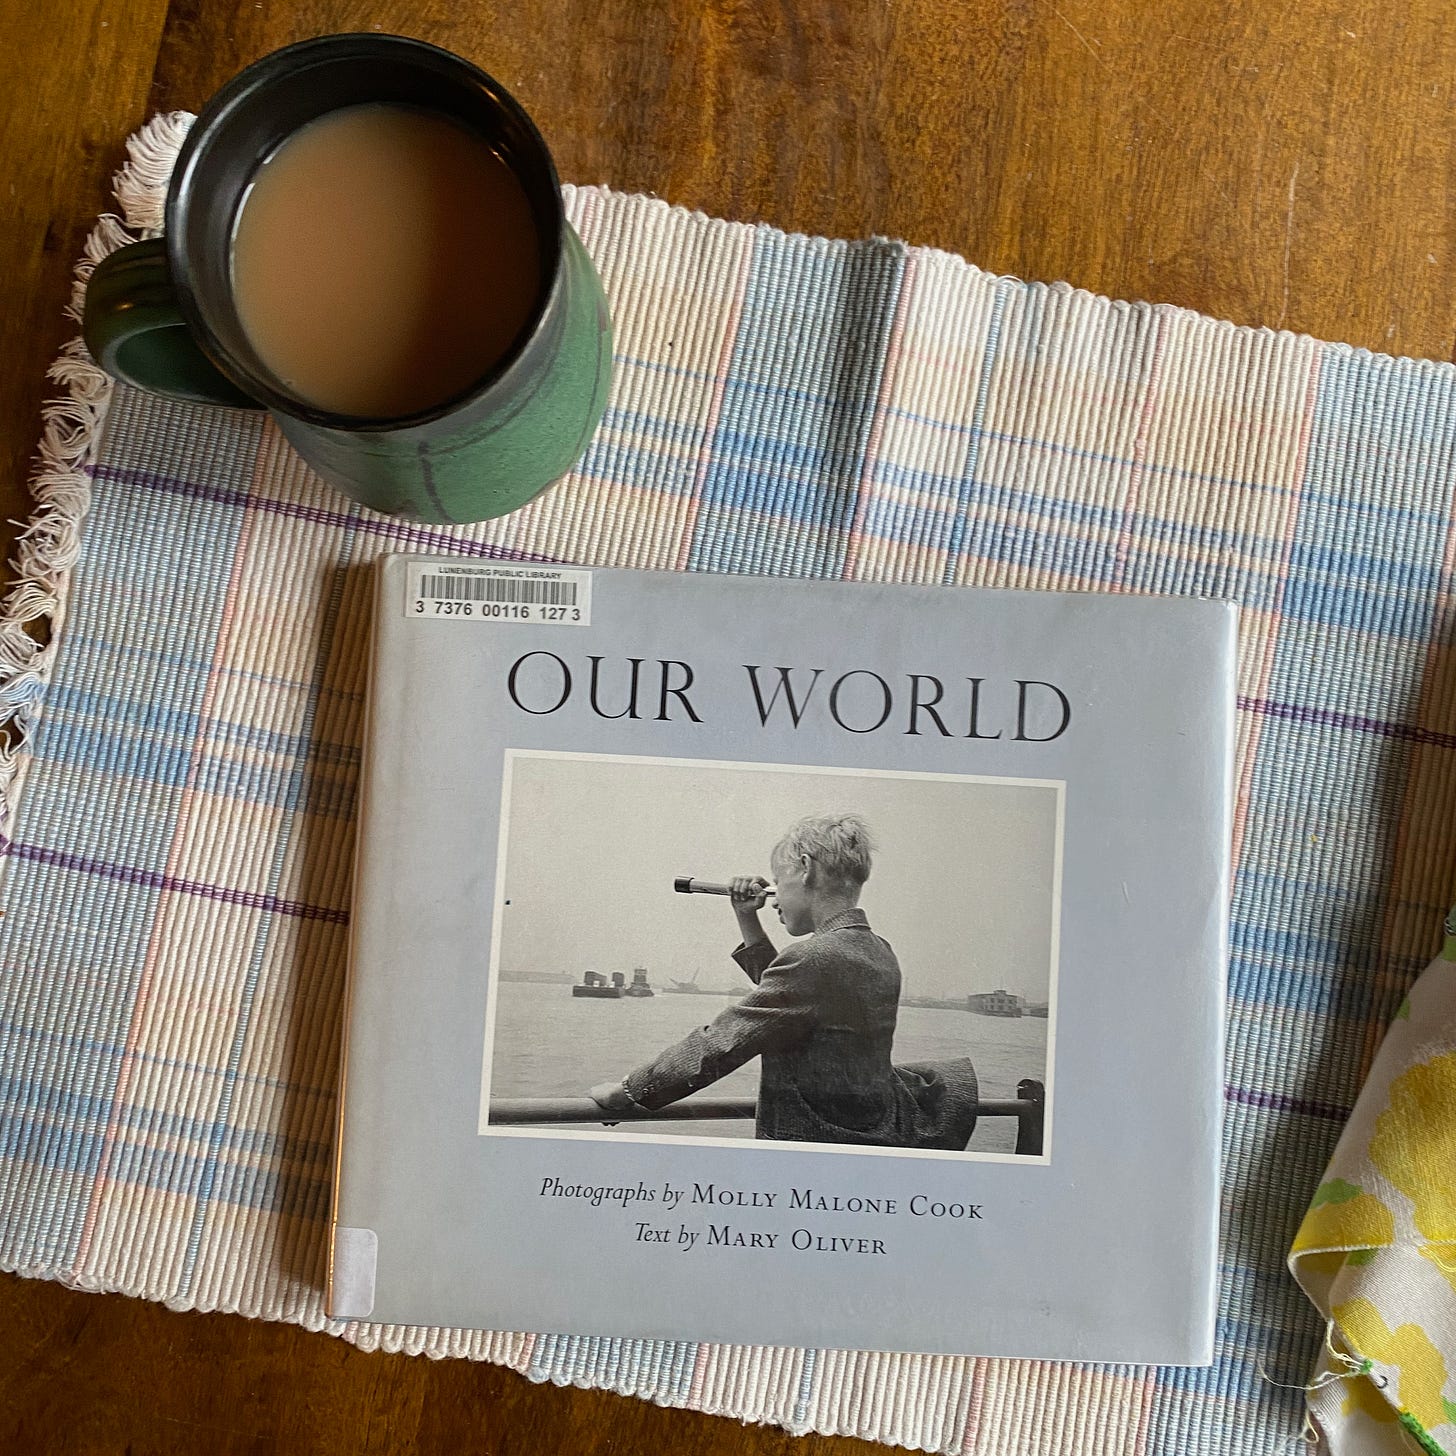 Our world on a woven placemat next to a mug of tea.